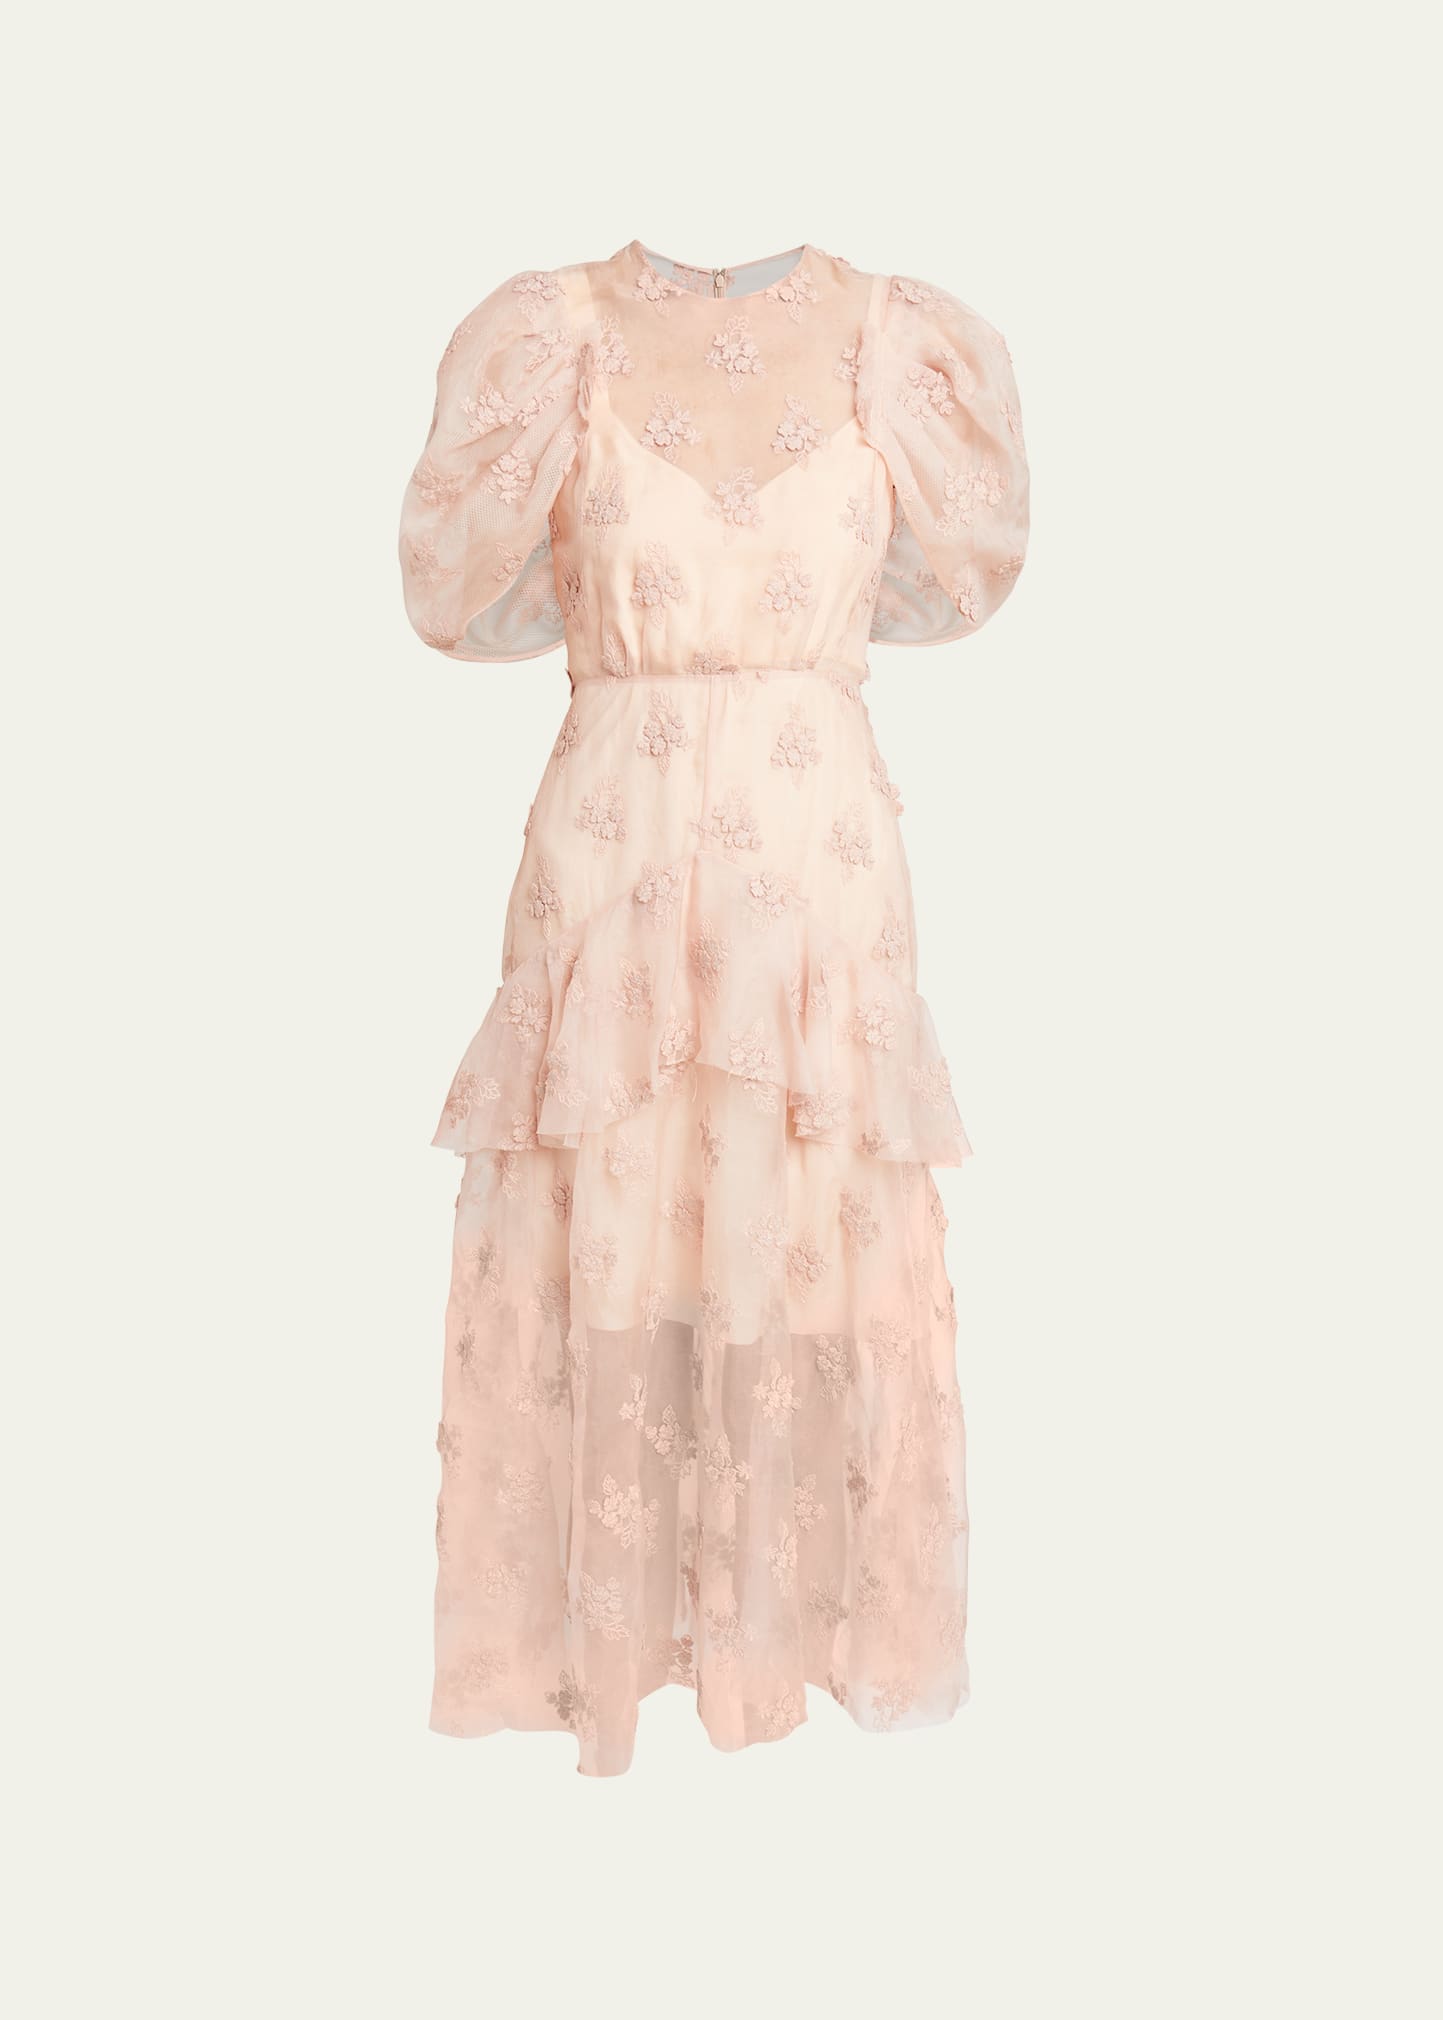 Erdem Sheer Peplum Midi Dress With Floral Embroidery In Ballet Pink